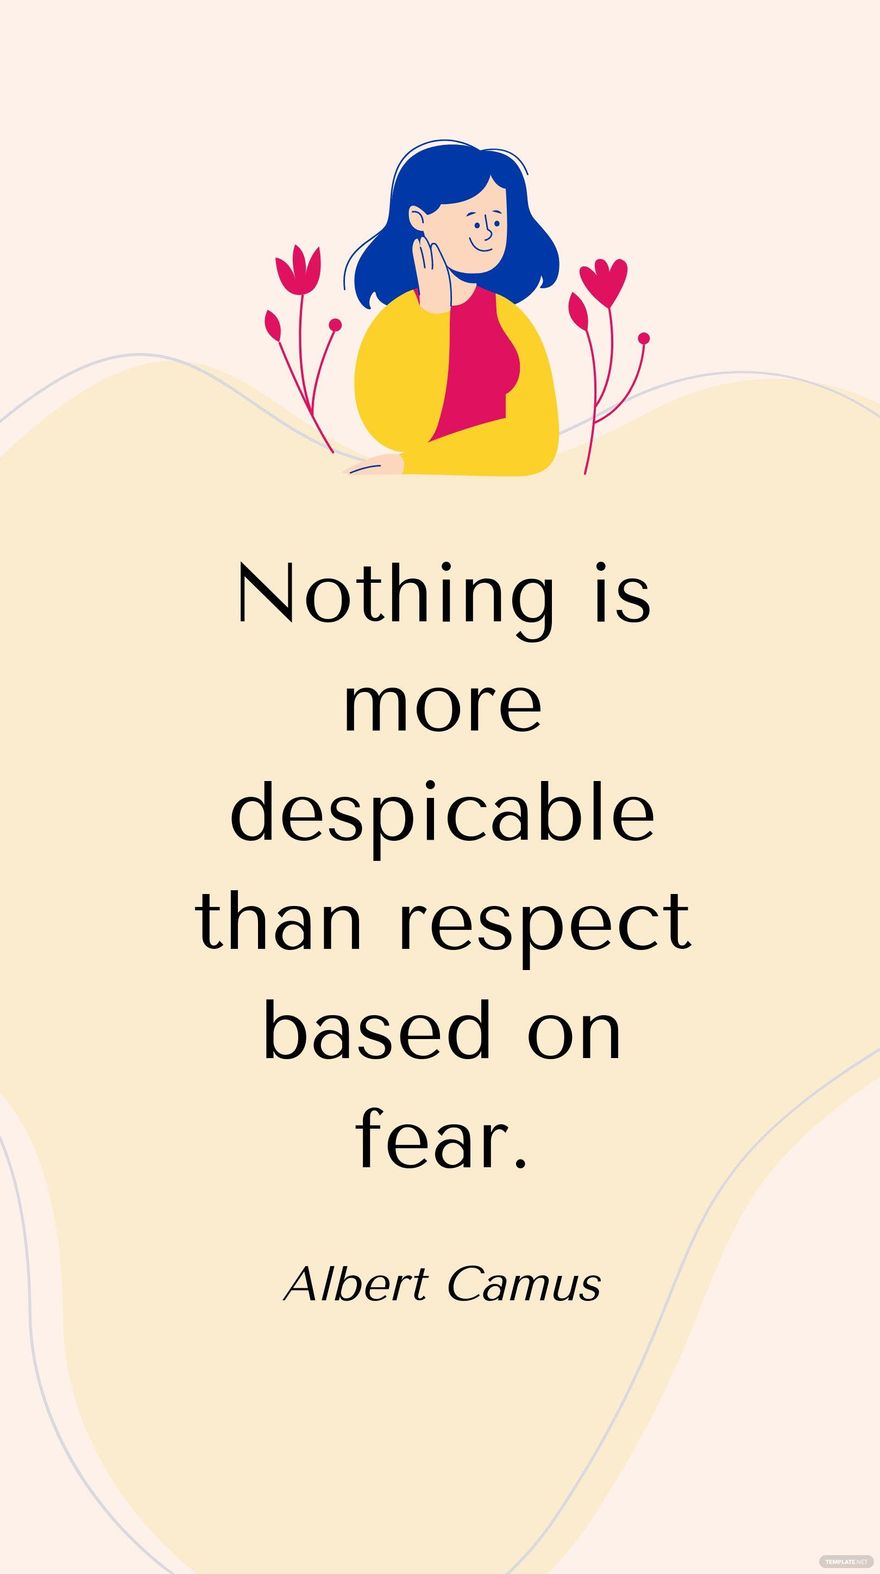 Albert Camus - Nothing is more despicable than respect based on fear.